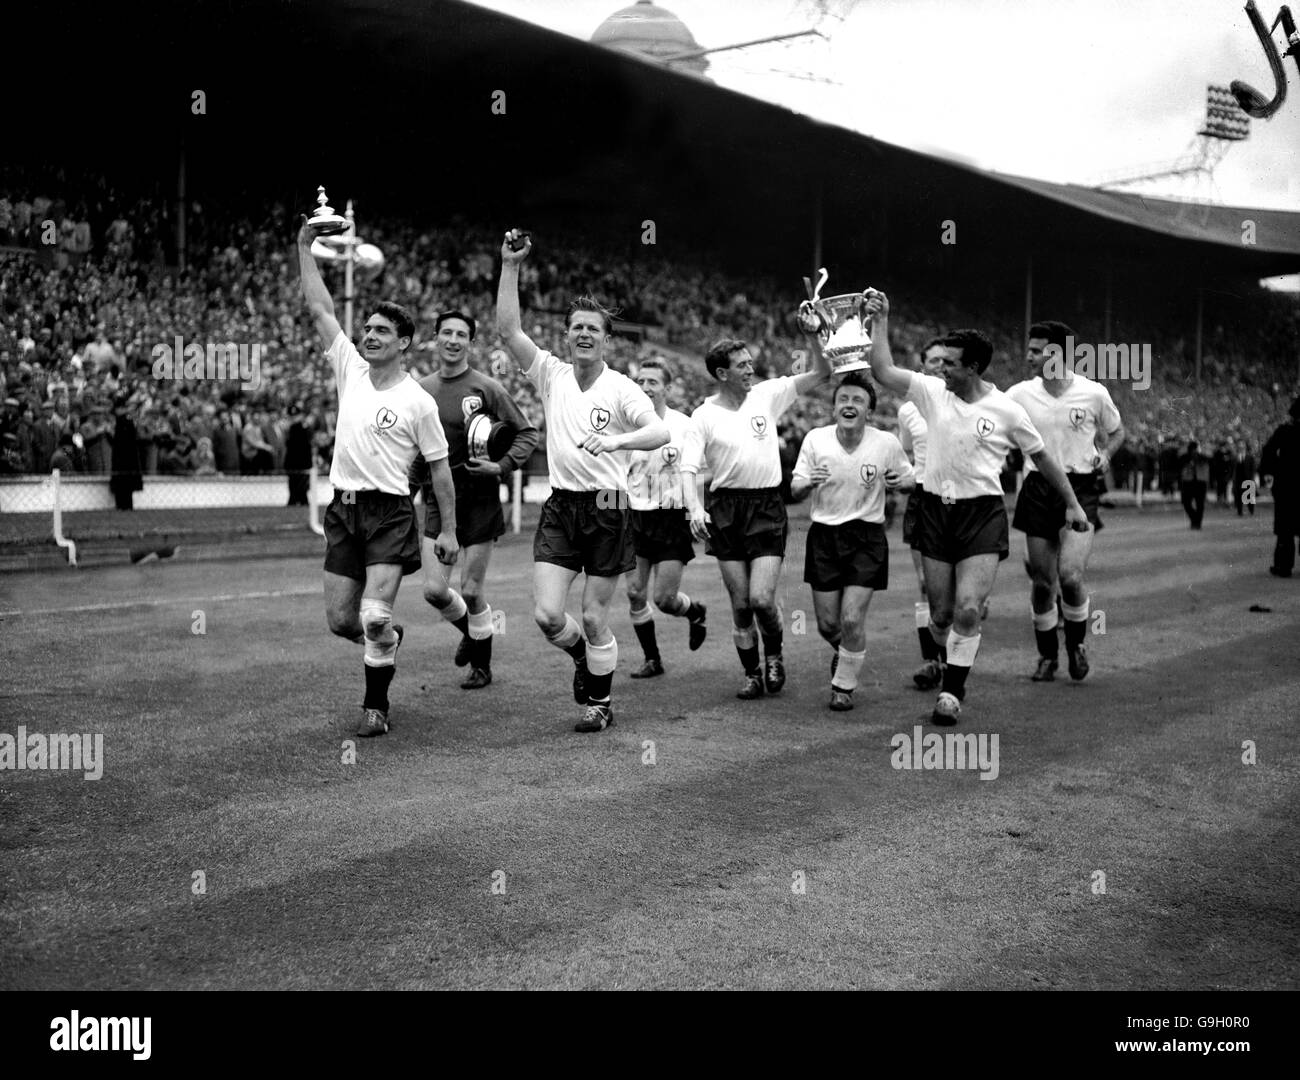 Tottenham Hotspur celebrate with the FA Cup after their 2-0 win secured The Double: (l-r) Ron Henry, Bill Brown, Peter Baker, Cliff Jones, Danny Blanchflower, Terry Dyson, Les Allen, Bobby Smith, Maurice Norman Stock Photo